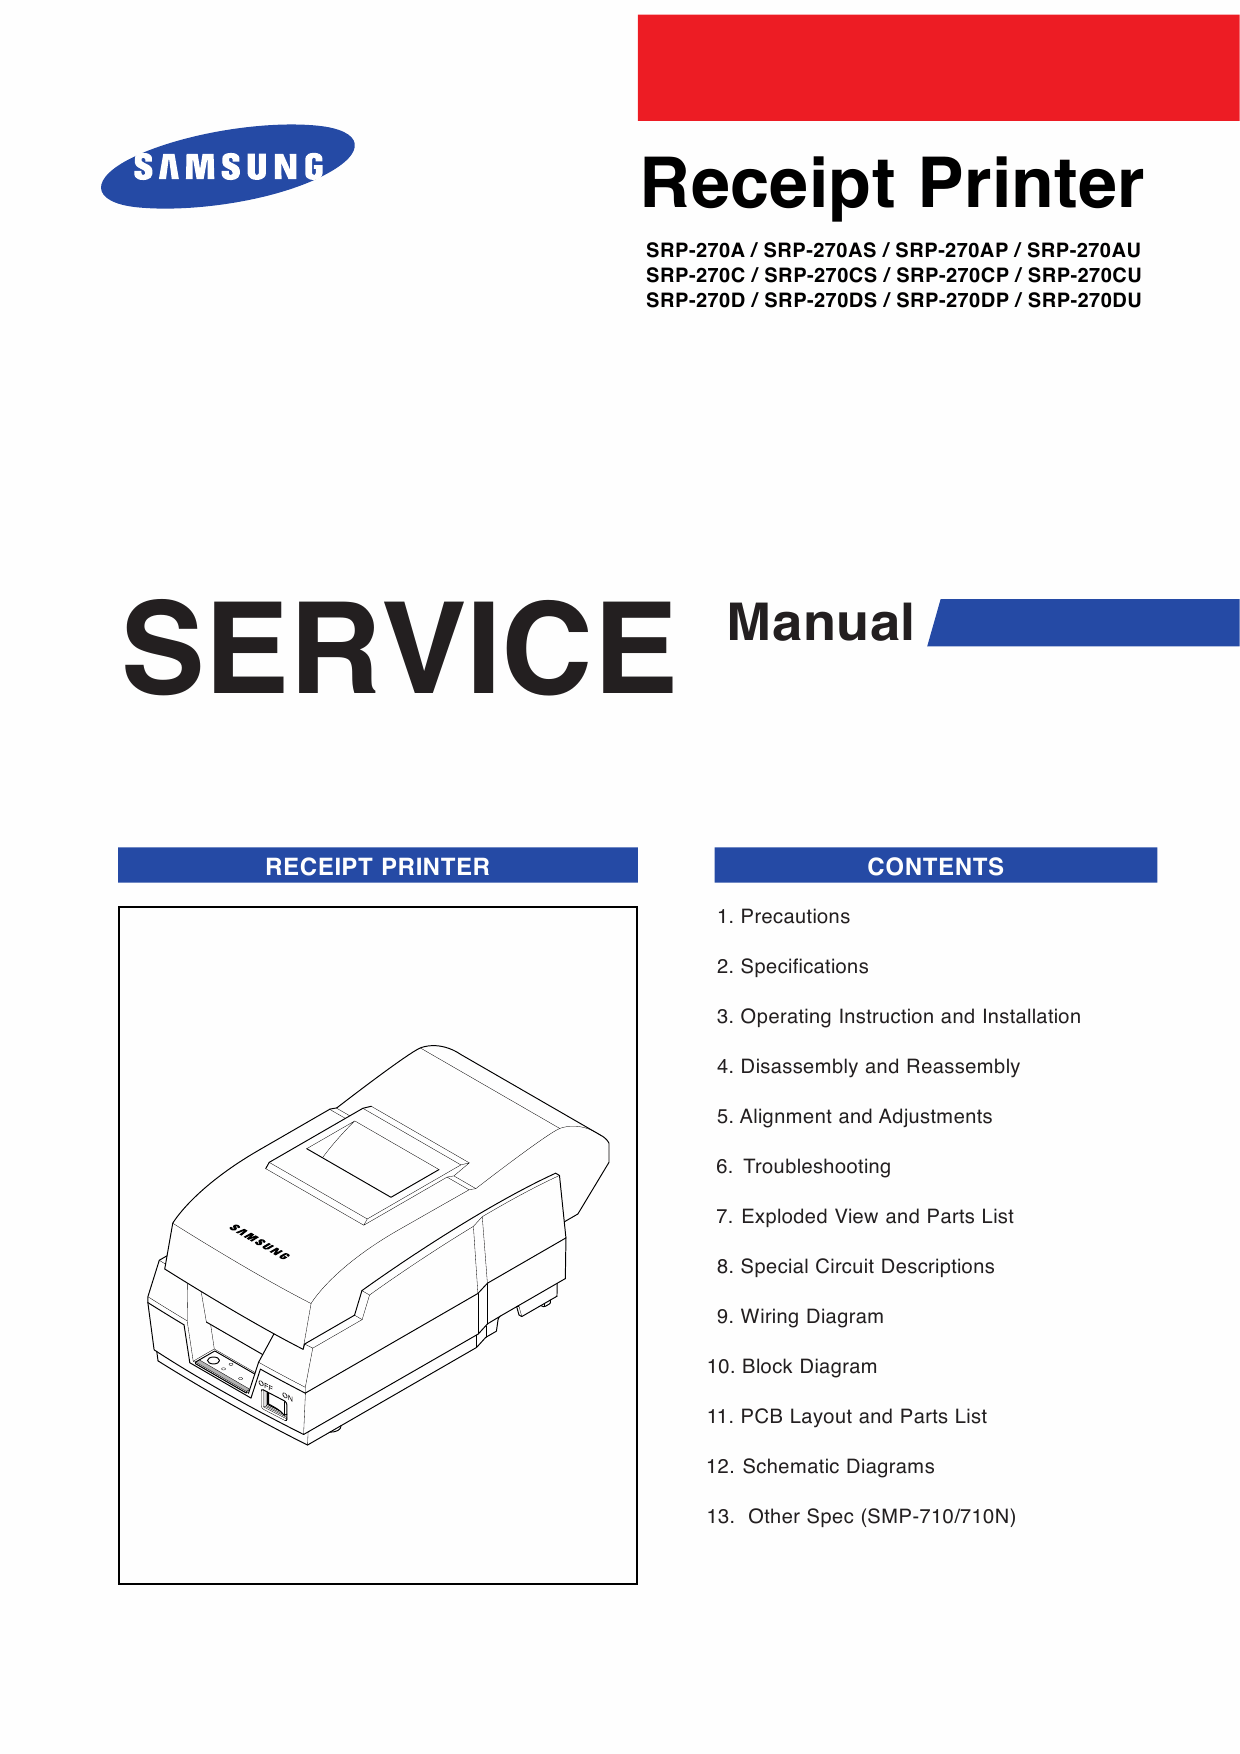 Samsung Receipt-Printer SRP-270 Parts and Service Manual-1